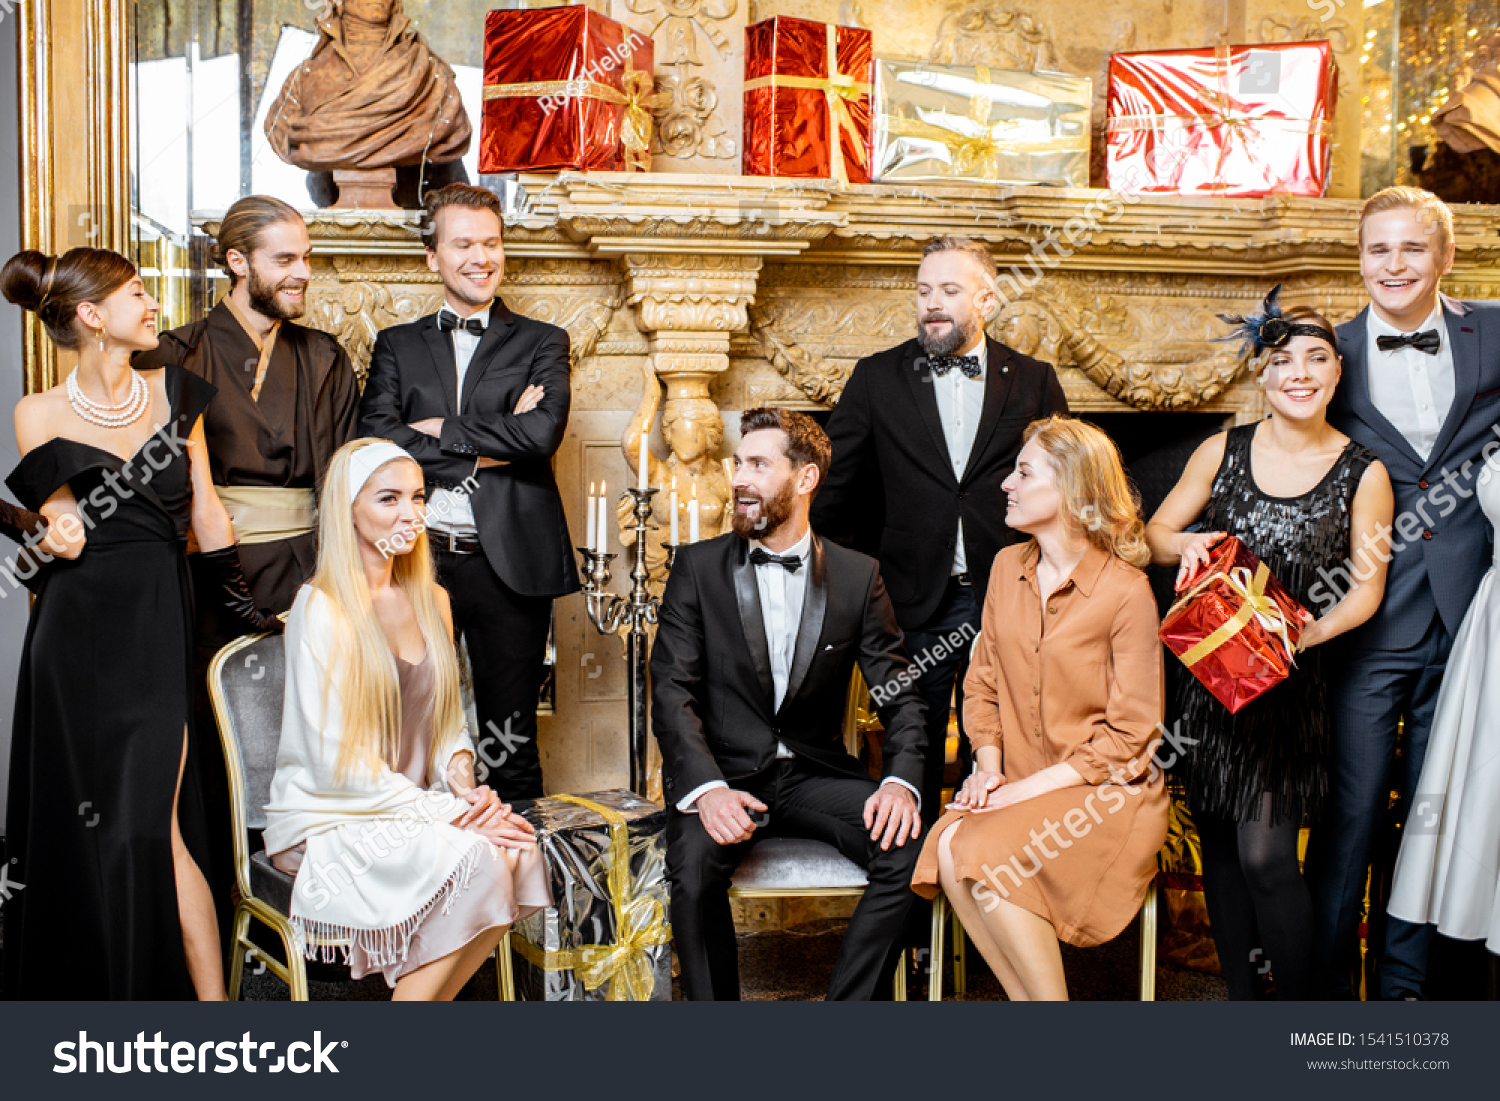 Staged group photo of an elegant well-dressed people near the beautifully decorated fireplace with christmas tree and presents during a New Year celebration #1541510378